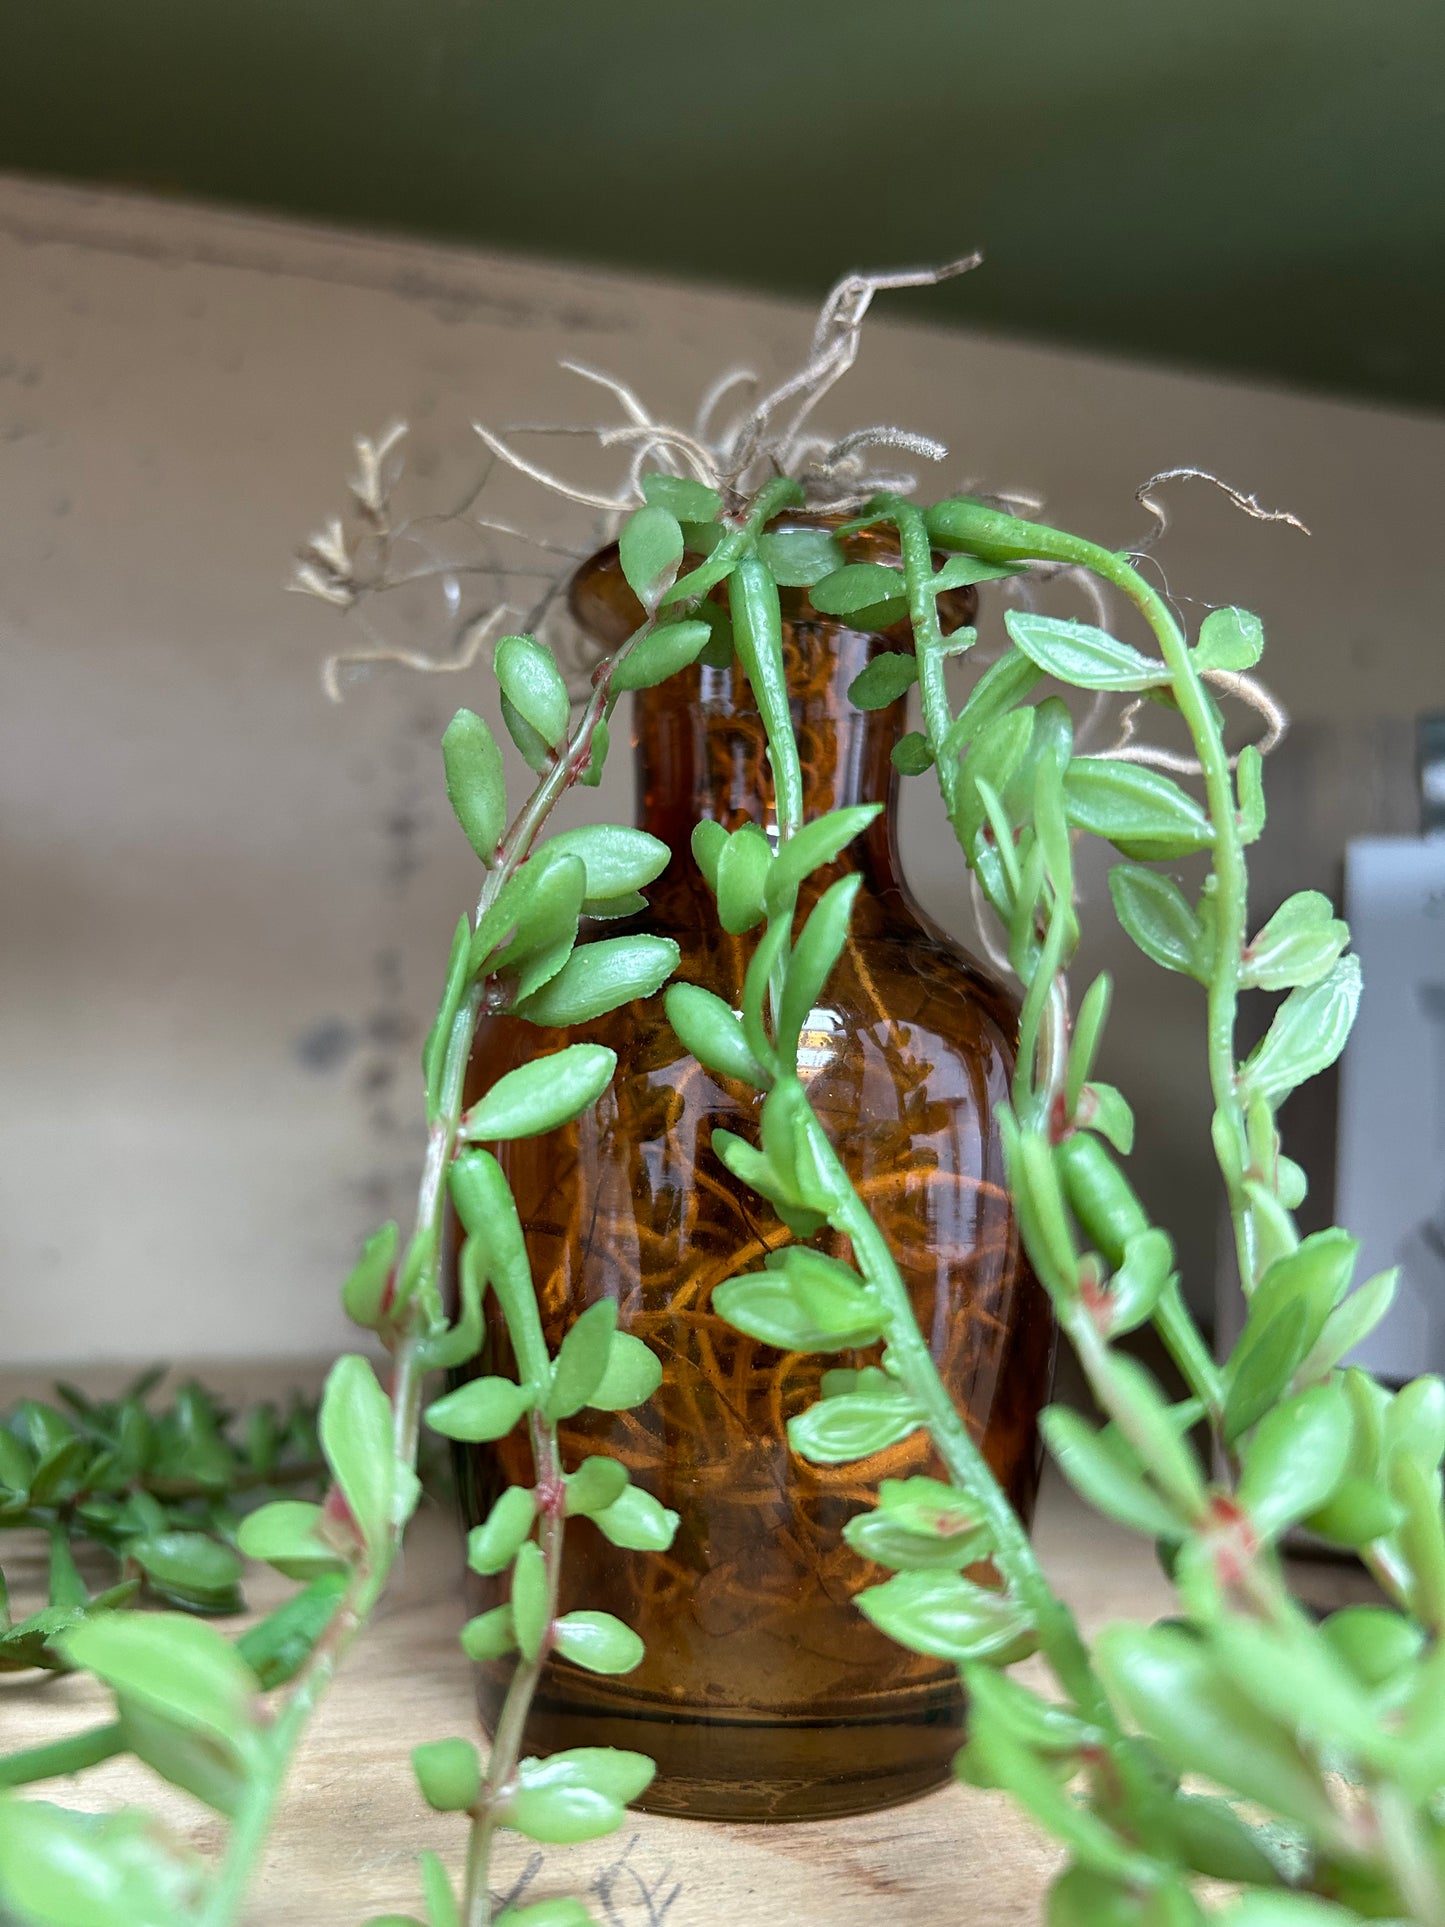 Amber Glass Bud Vase with Hanging Succulent Stem